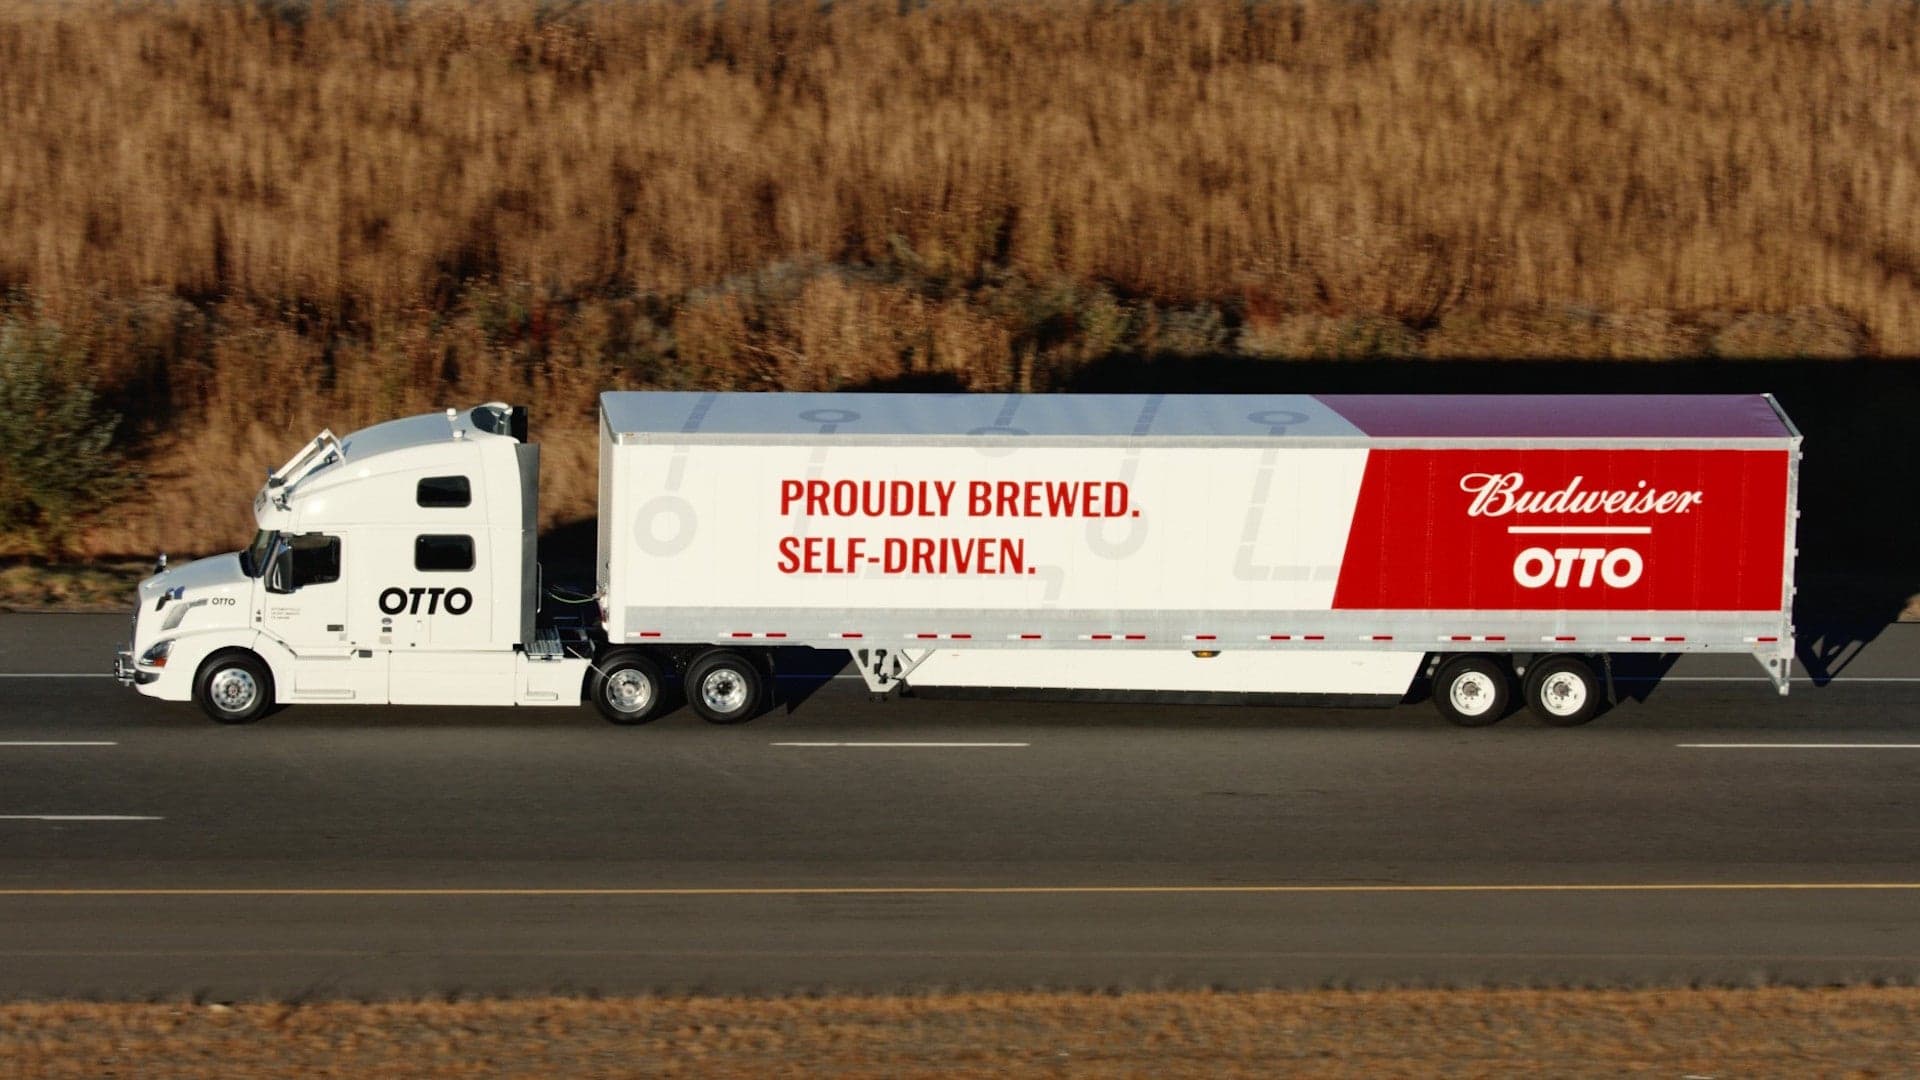 Uber Self-Driving Truck Autonomously Drives 120 Miles to Deliver Beer